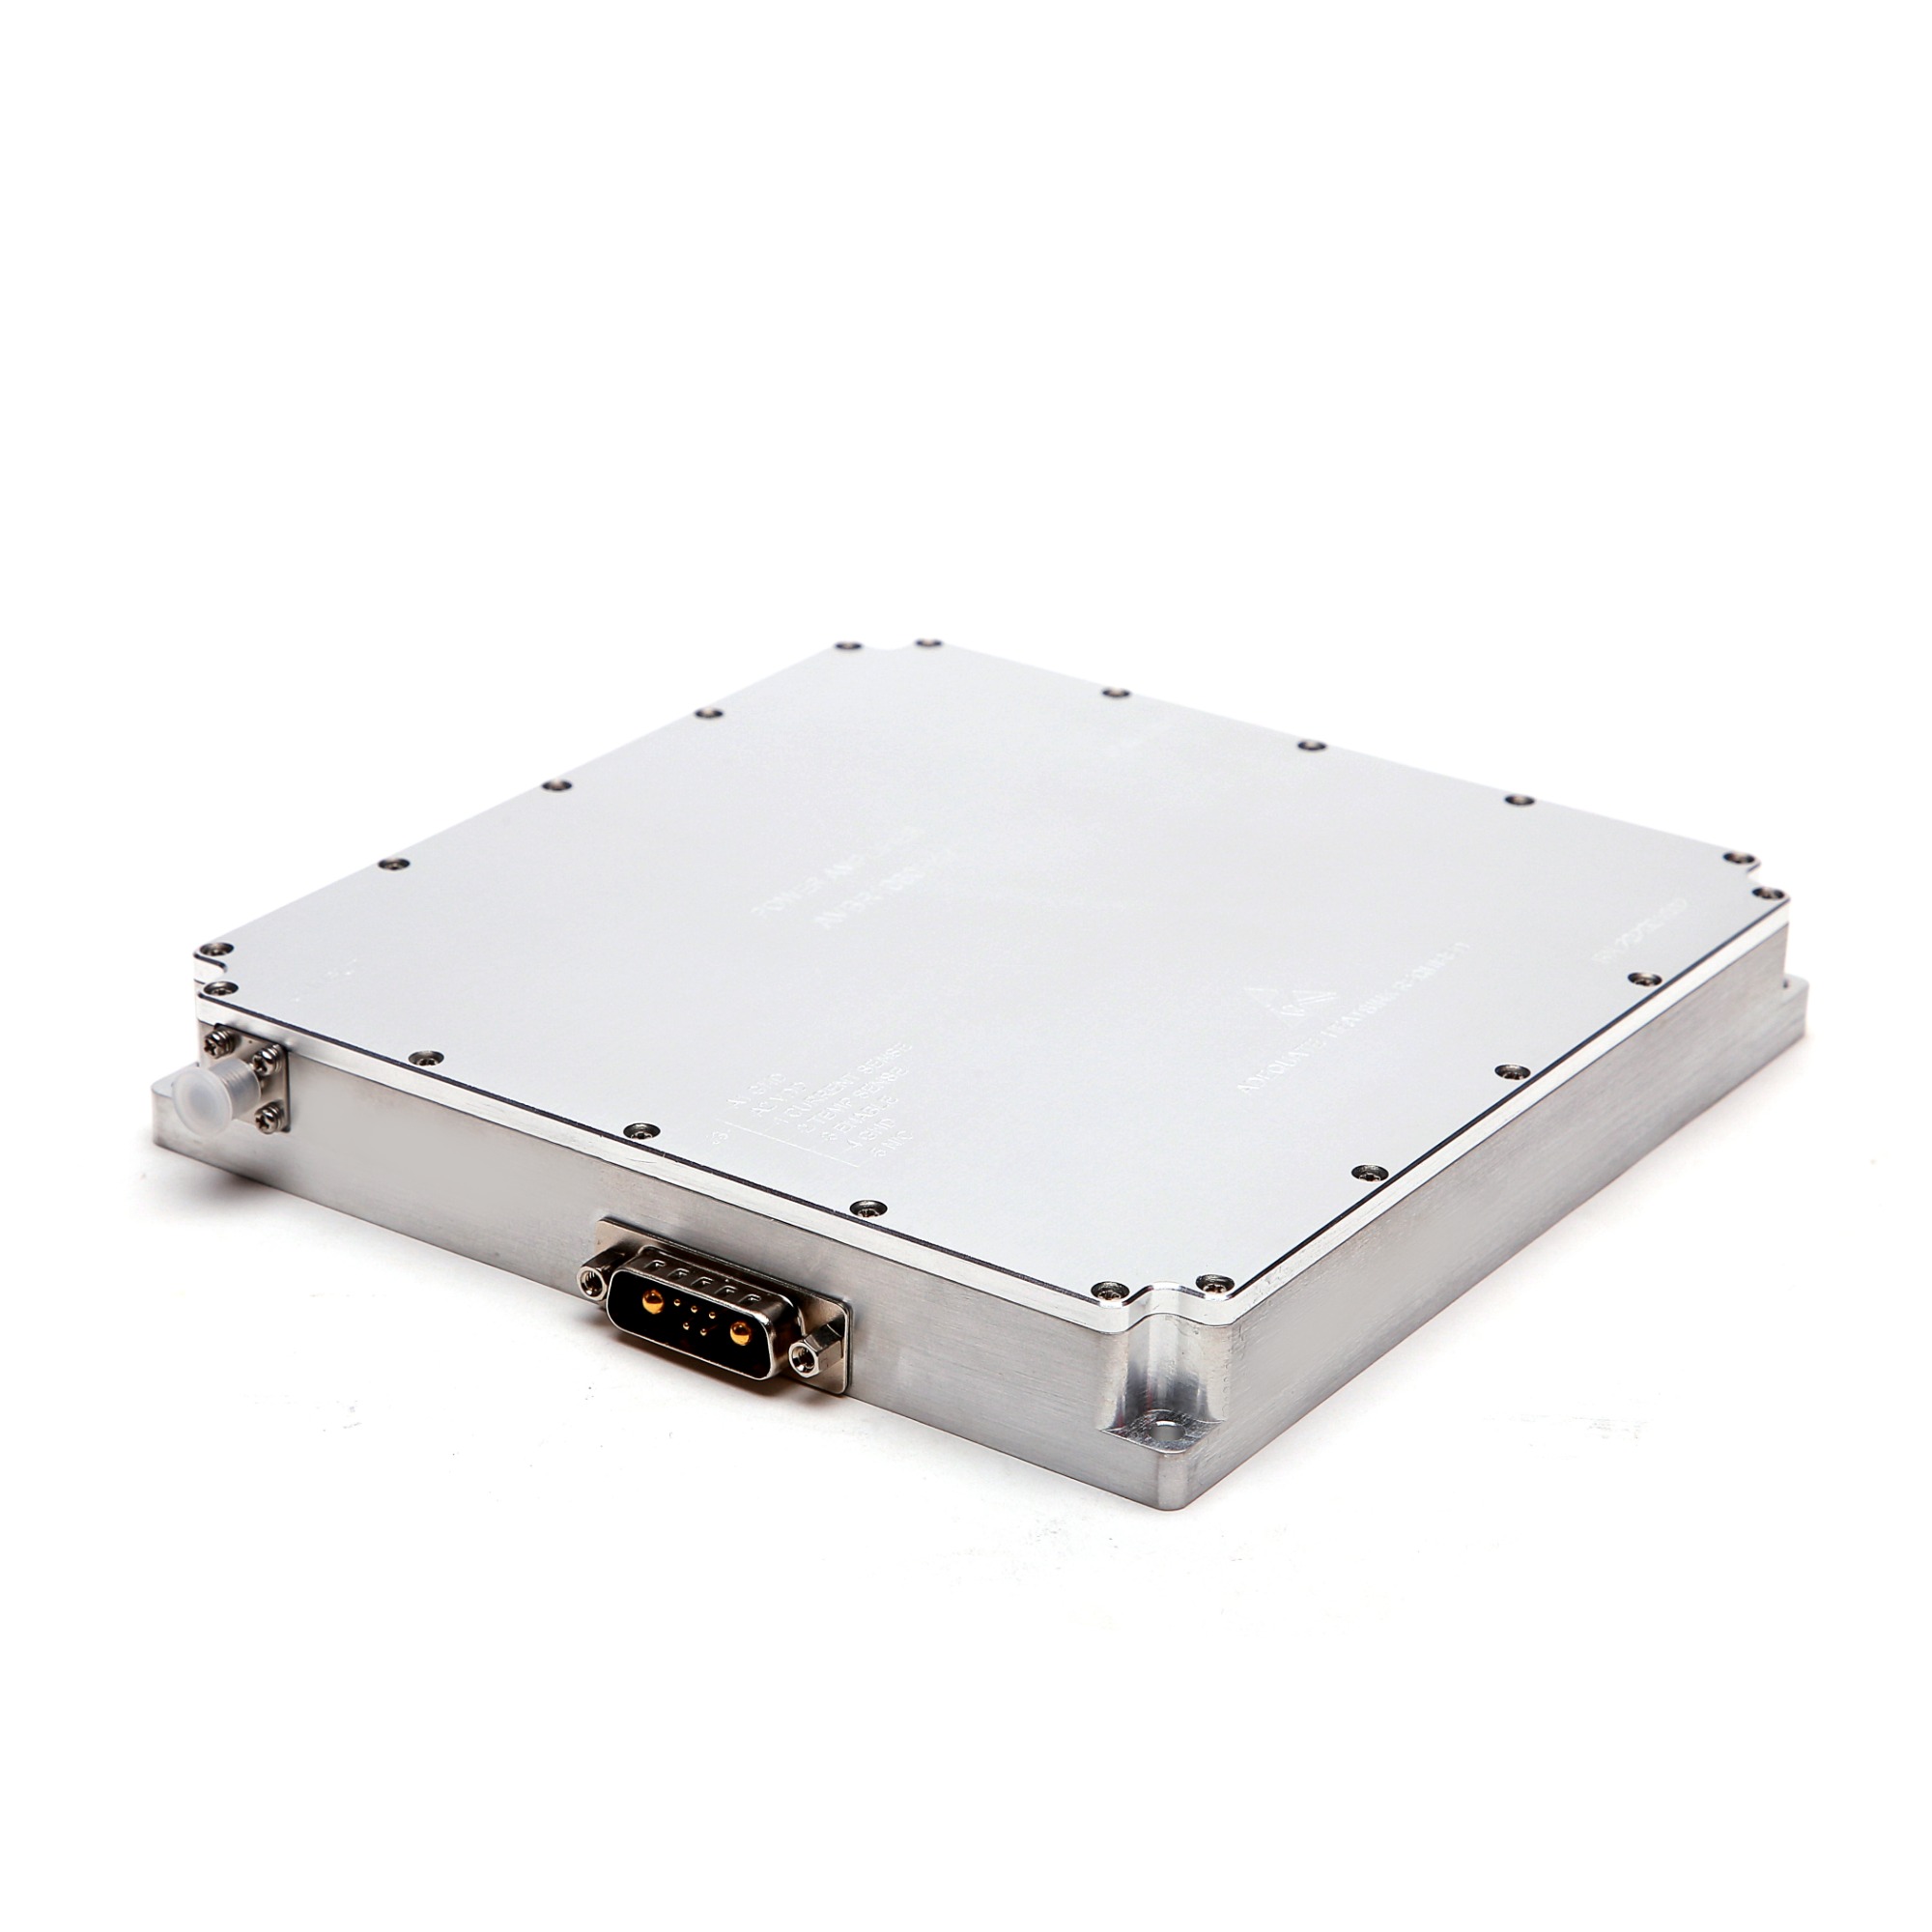 New AmpliVisionS 120 W Solid-State Power Amplifier from 0.7 to 2.7 GHz